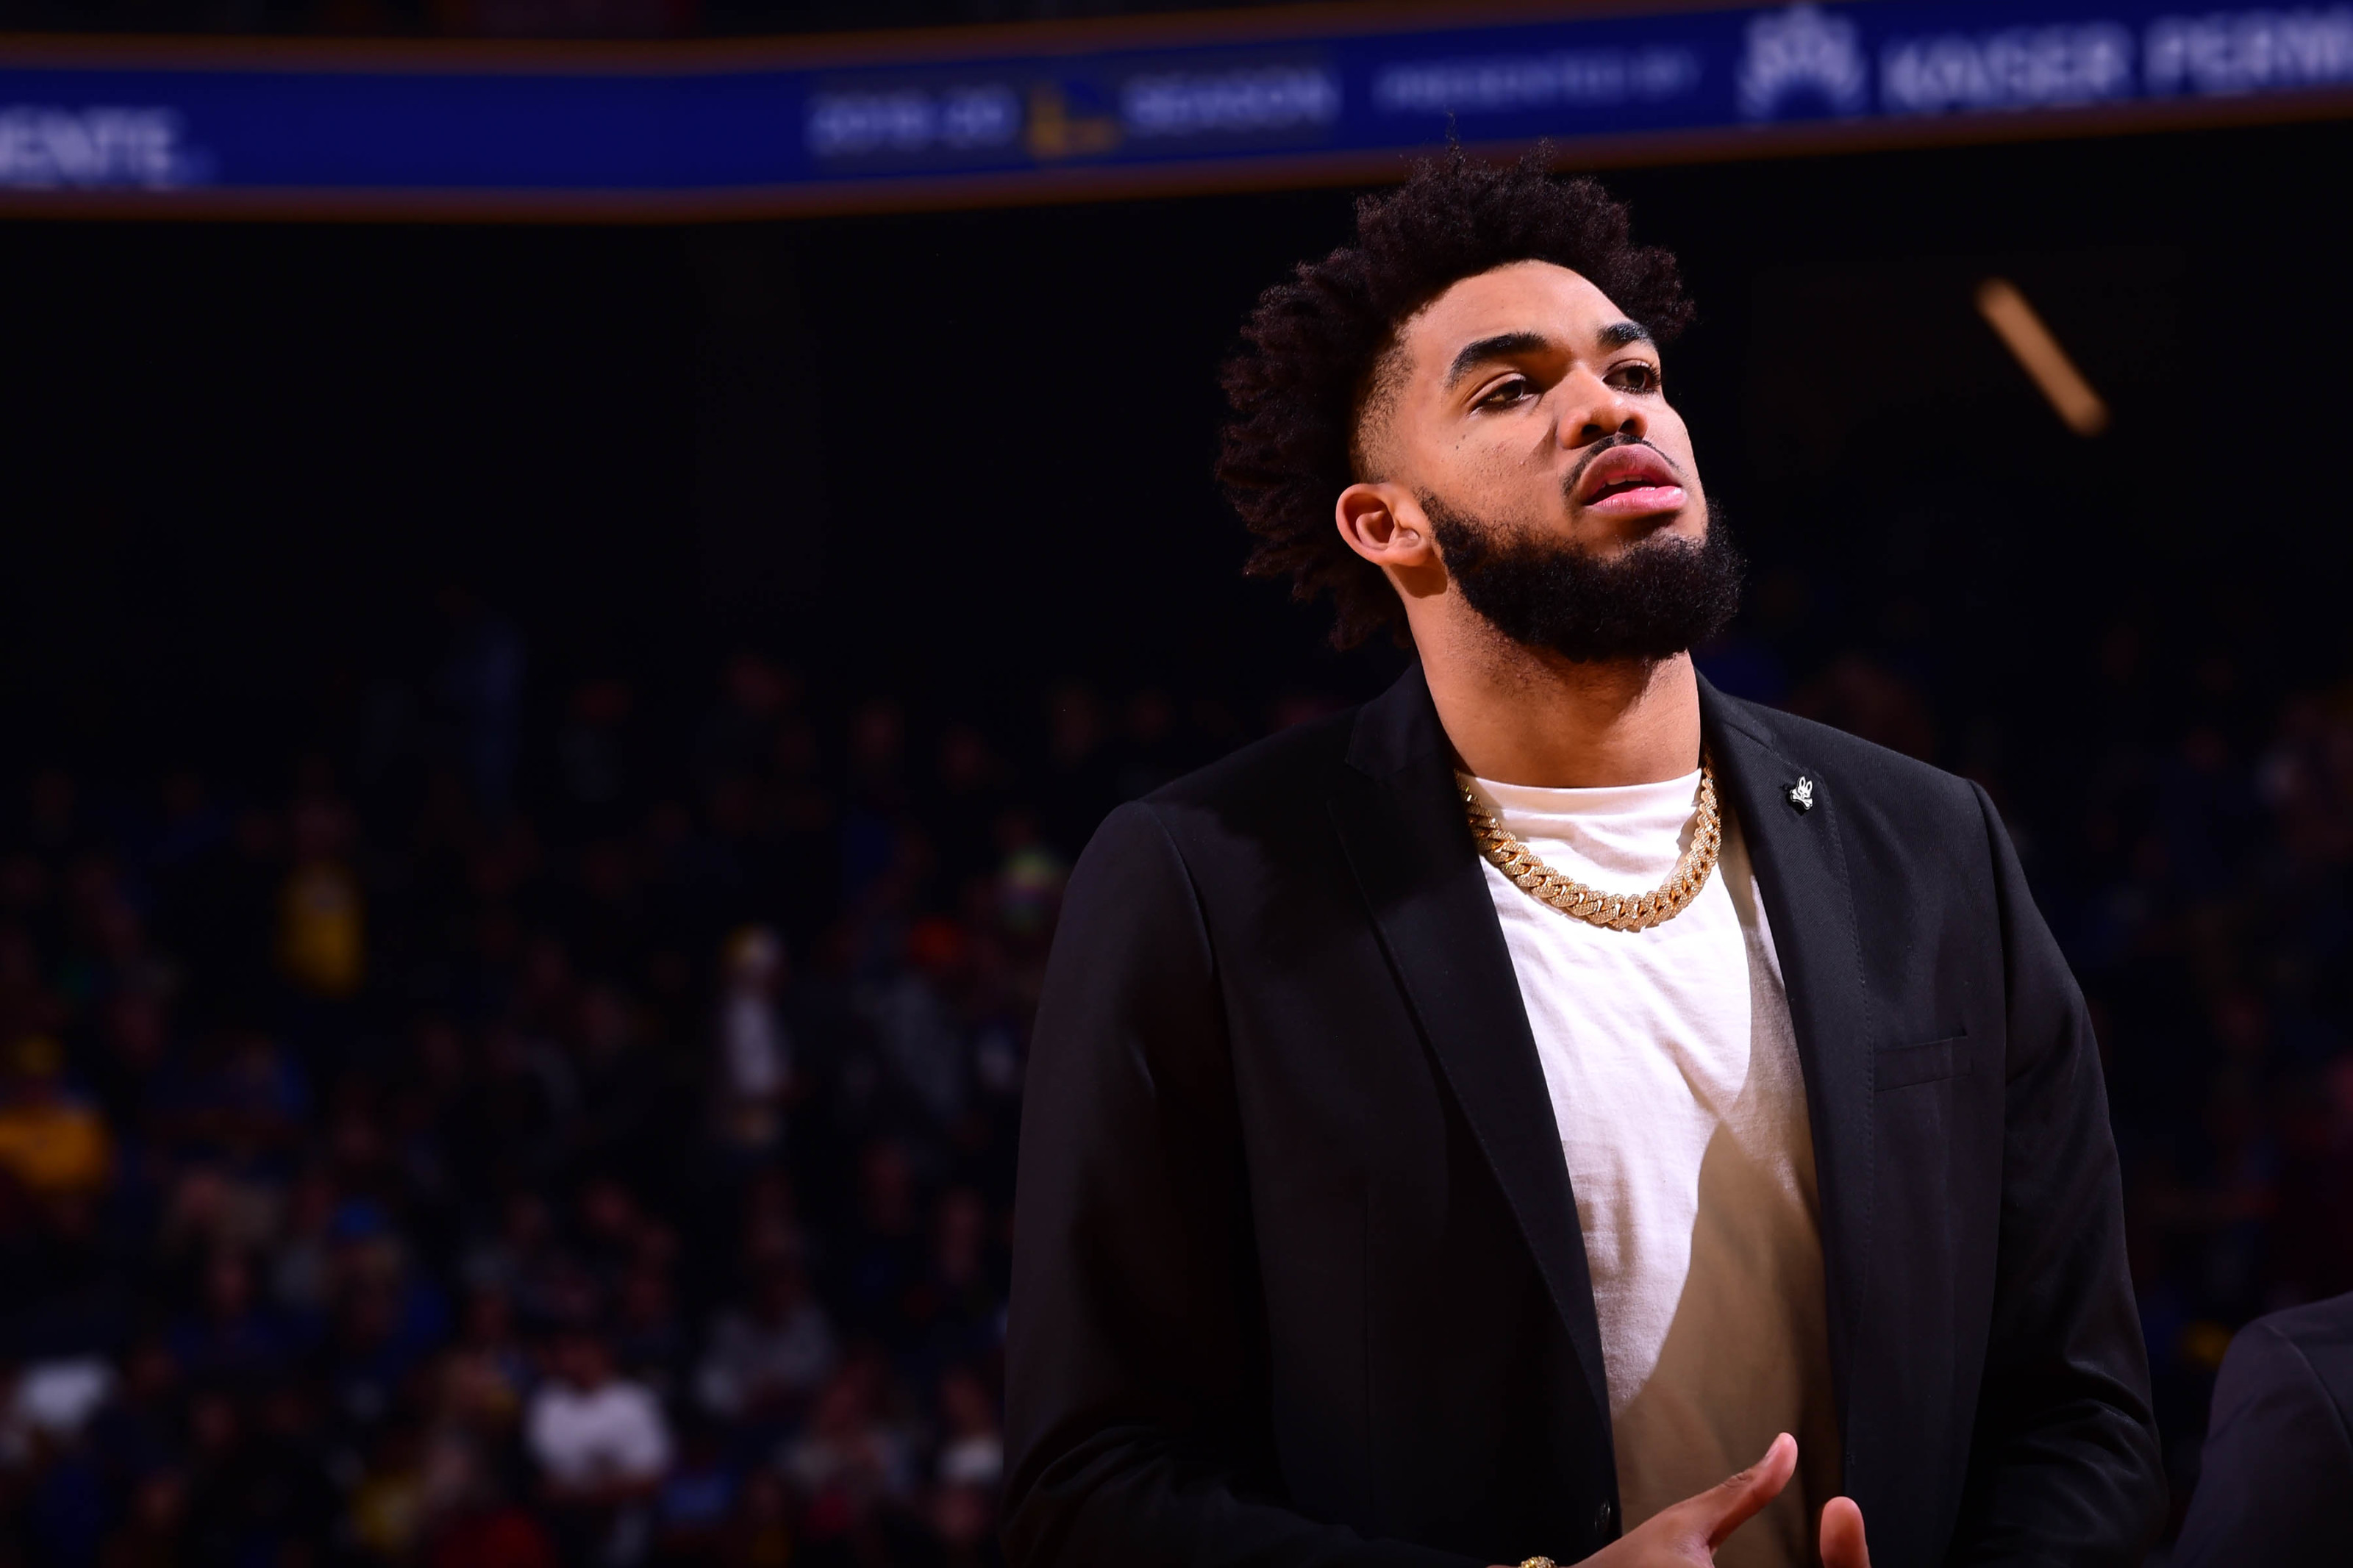 Executives reportedly believe Karl-Anthony Towns may be out of